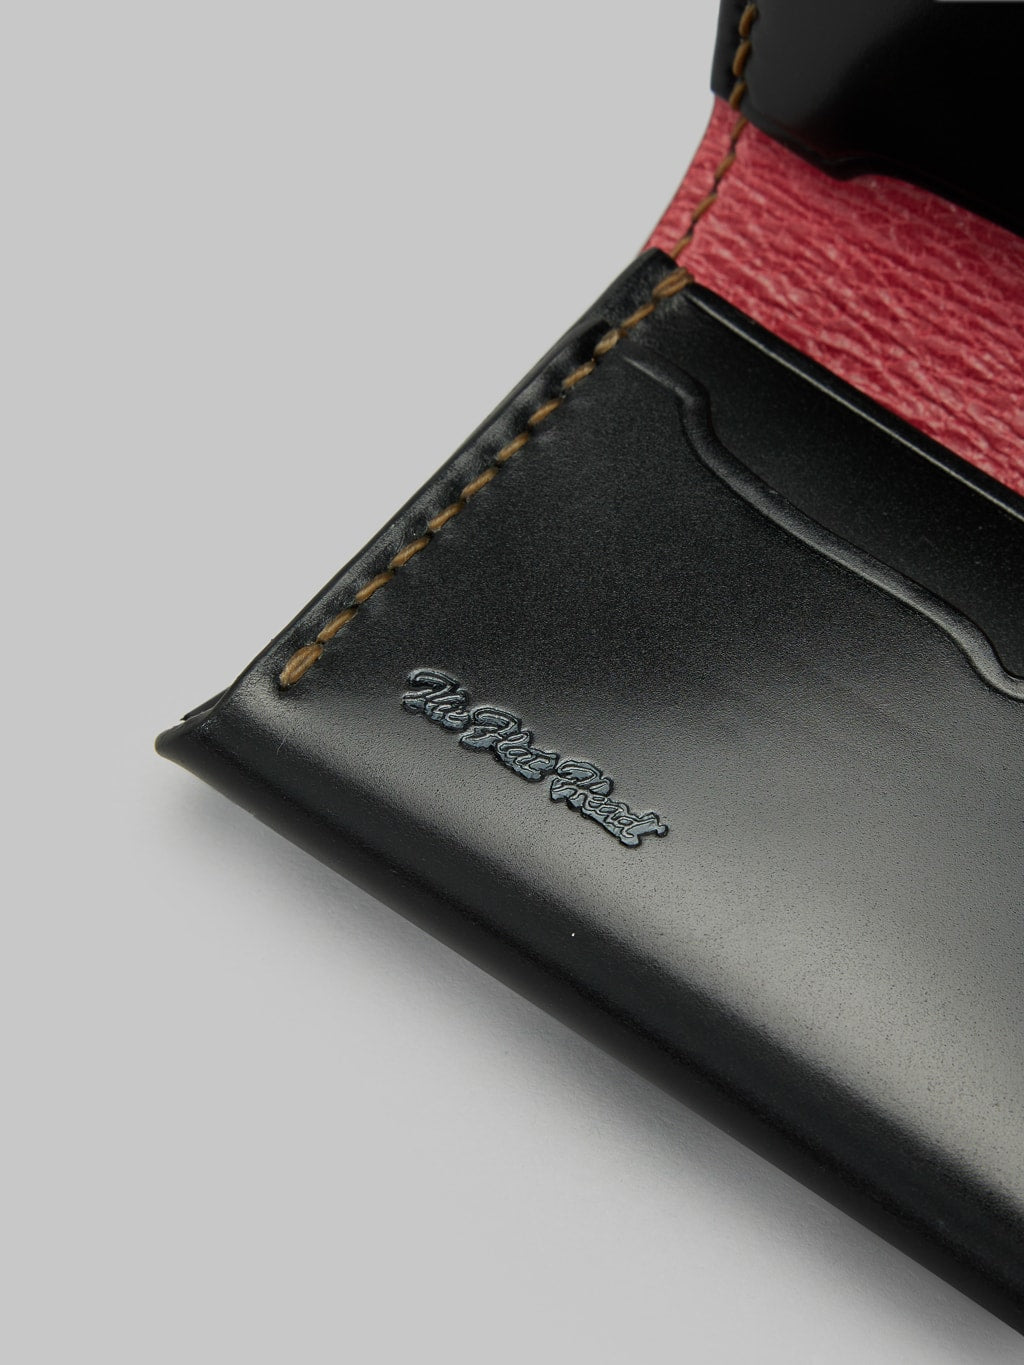 The Flat Head handsewn small cordovan card case Black stamped logo